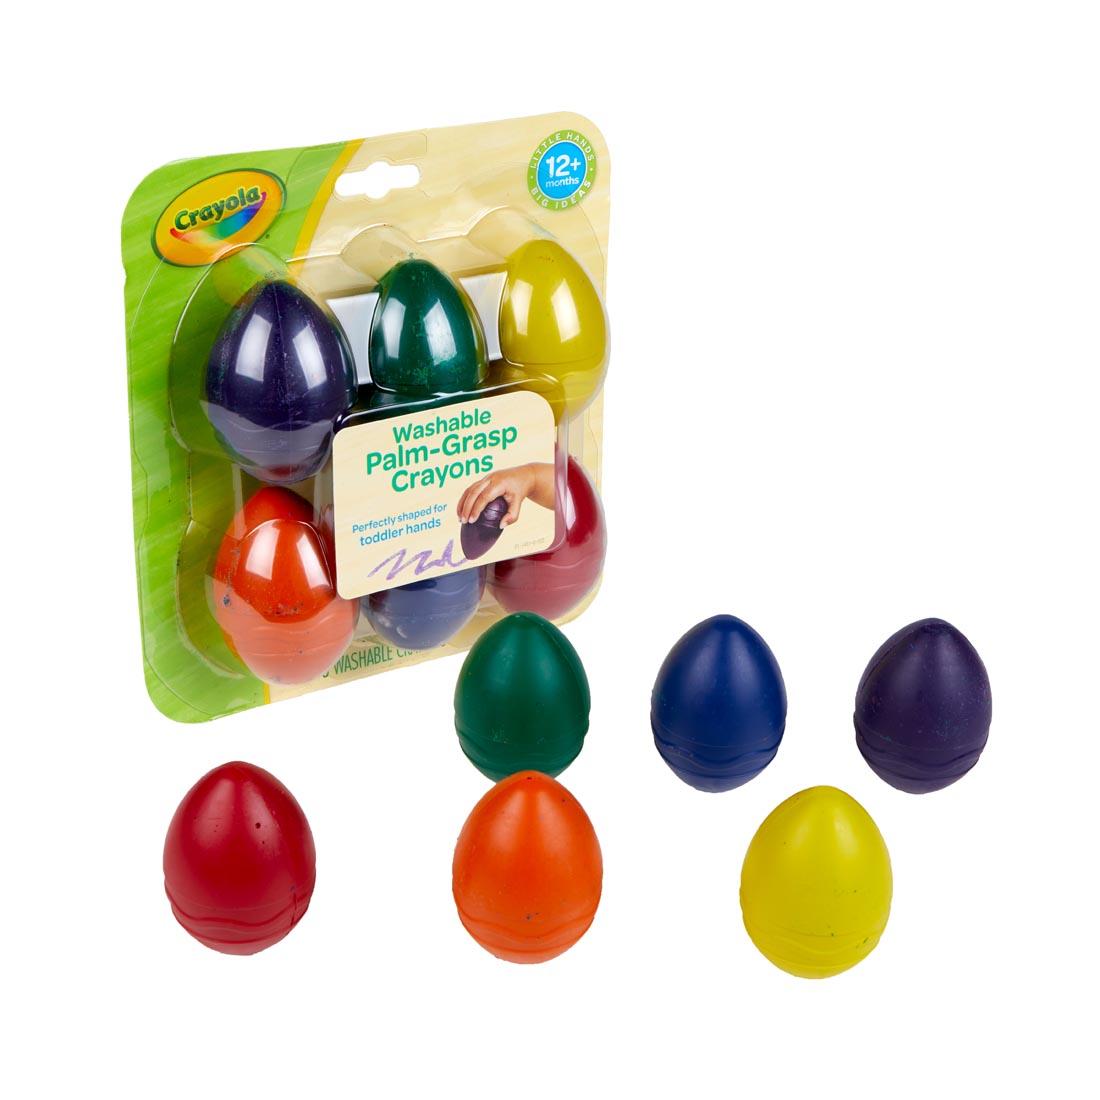 Crayola Washable Palm-Grasp Crayon Package with 6 Egg-Shaped Crayons